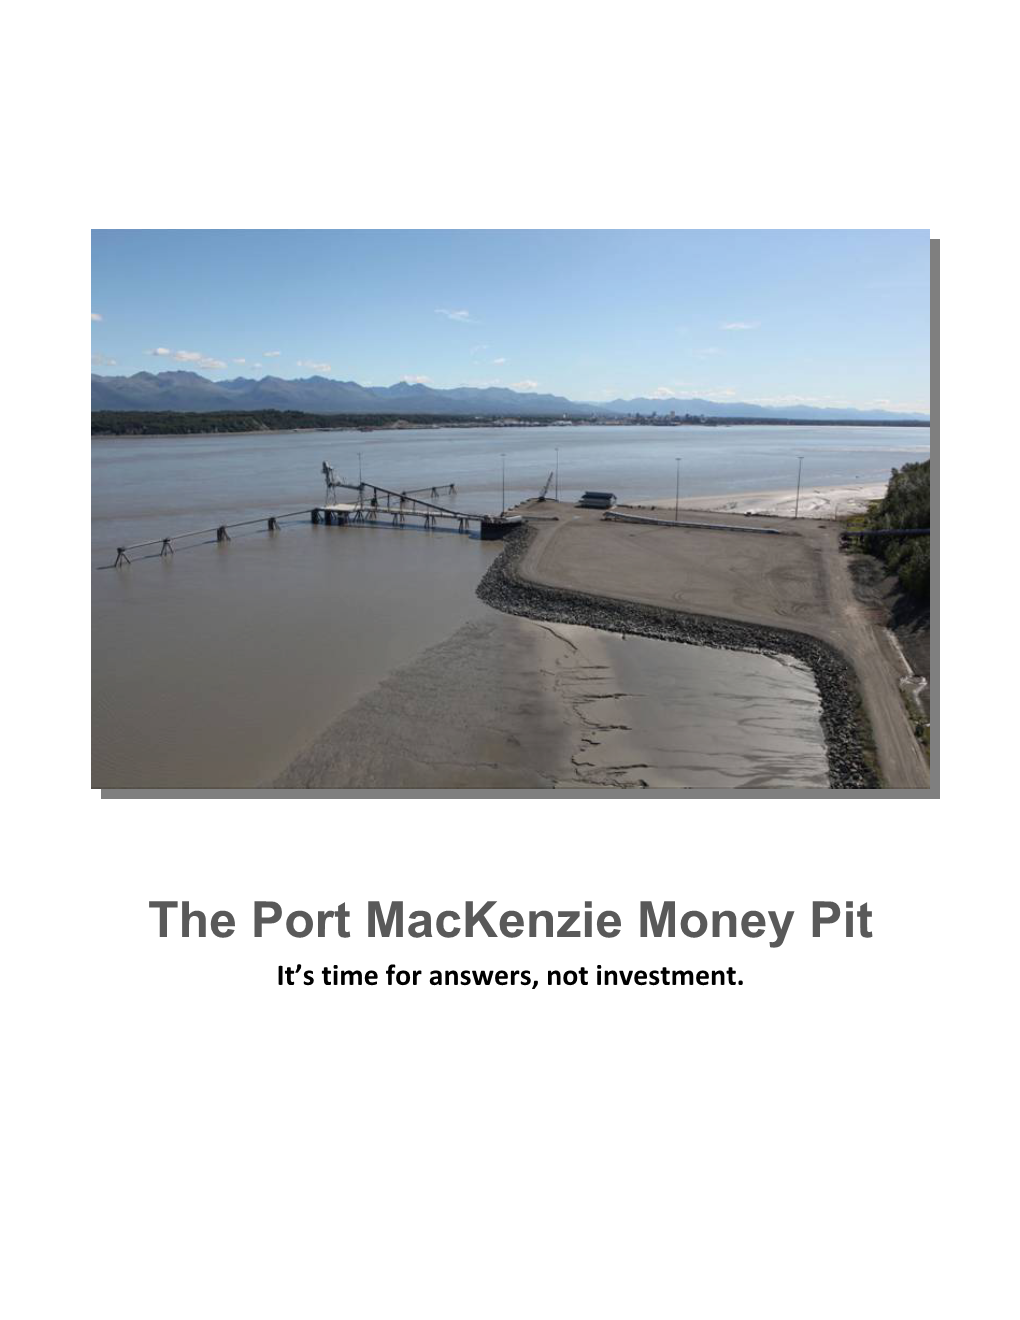 The Port Mackenzie Money Pit It’S Time for Answers, Not Investment